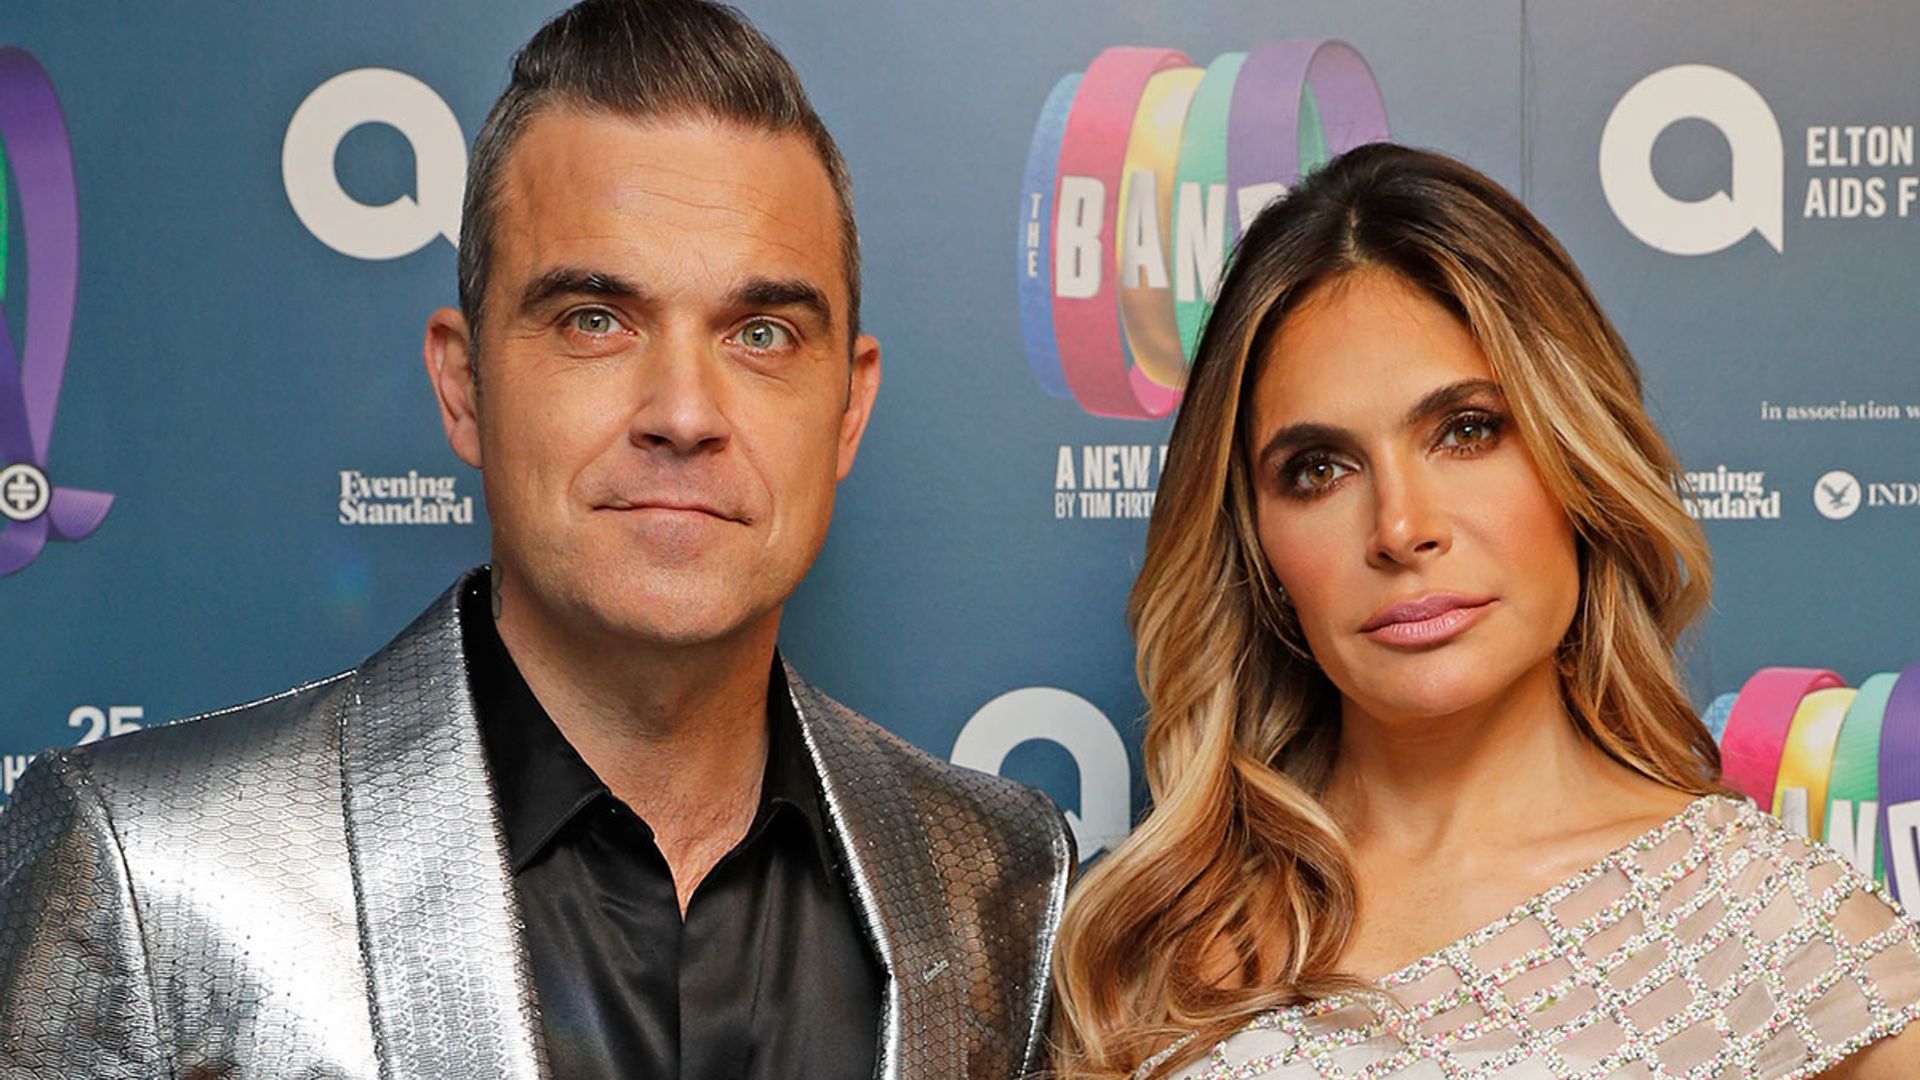 robbie williams and ayda field at event